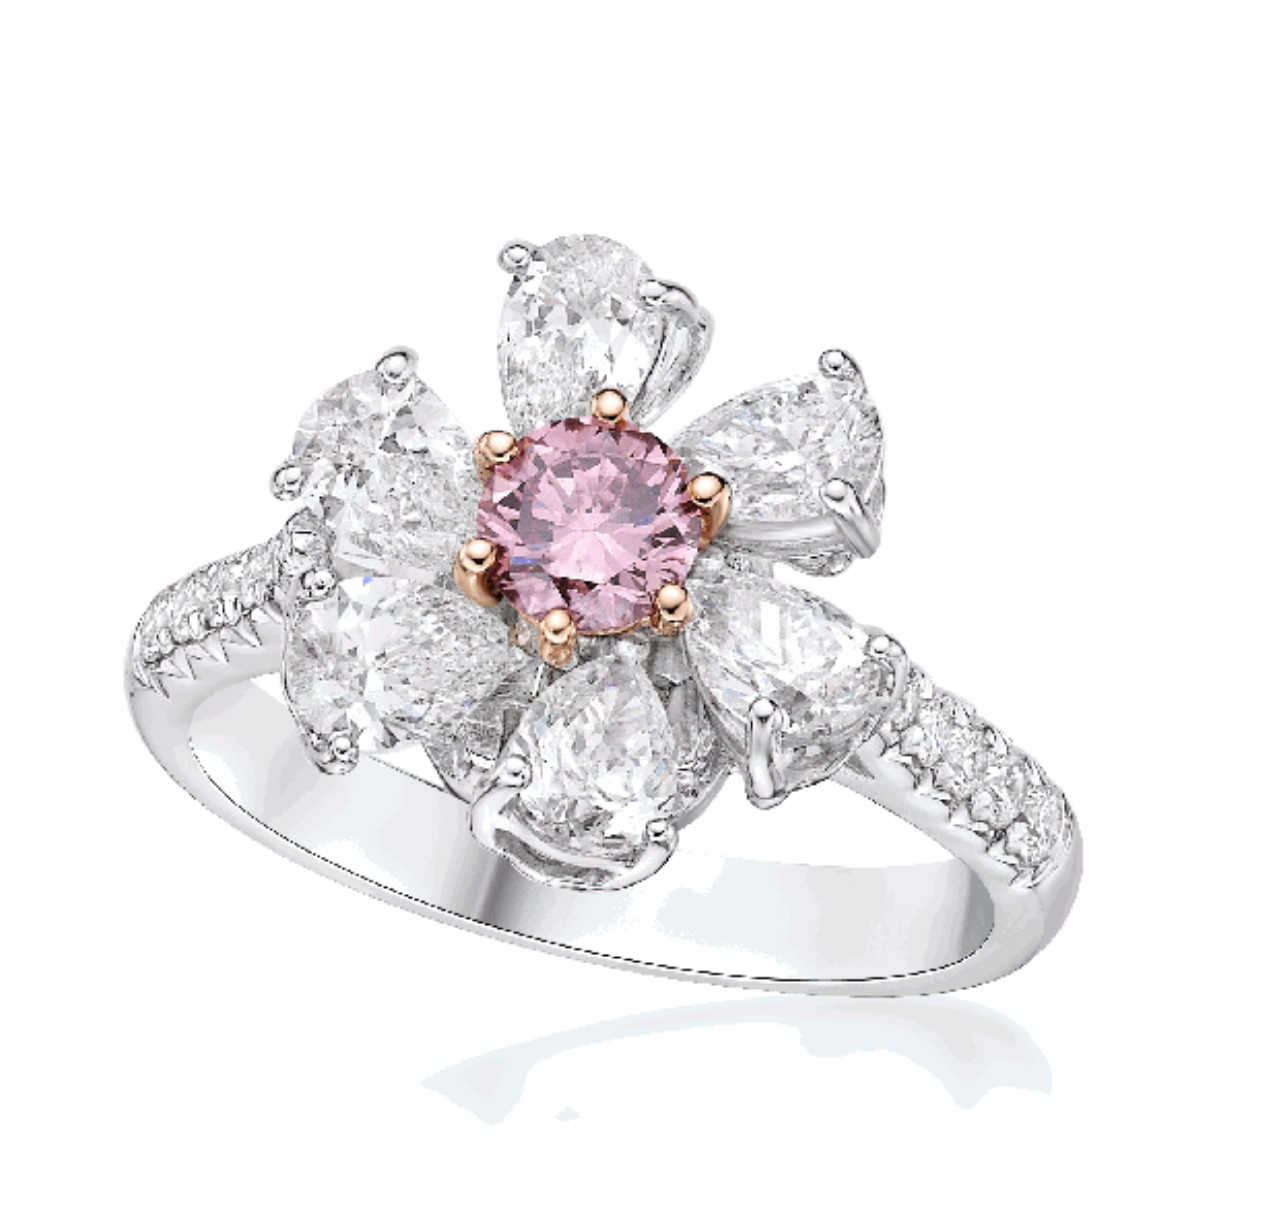 2 carat diamond ring with 6 Pear Shaped Diamond Petals and 1 center Pink diamond  ring in 18k White Gold 